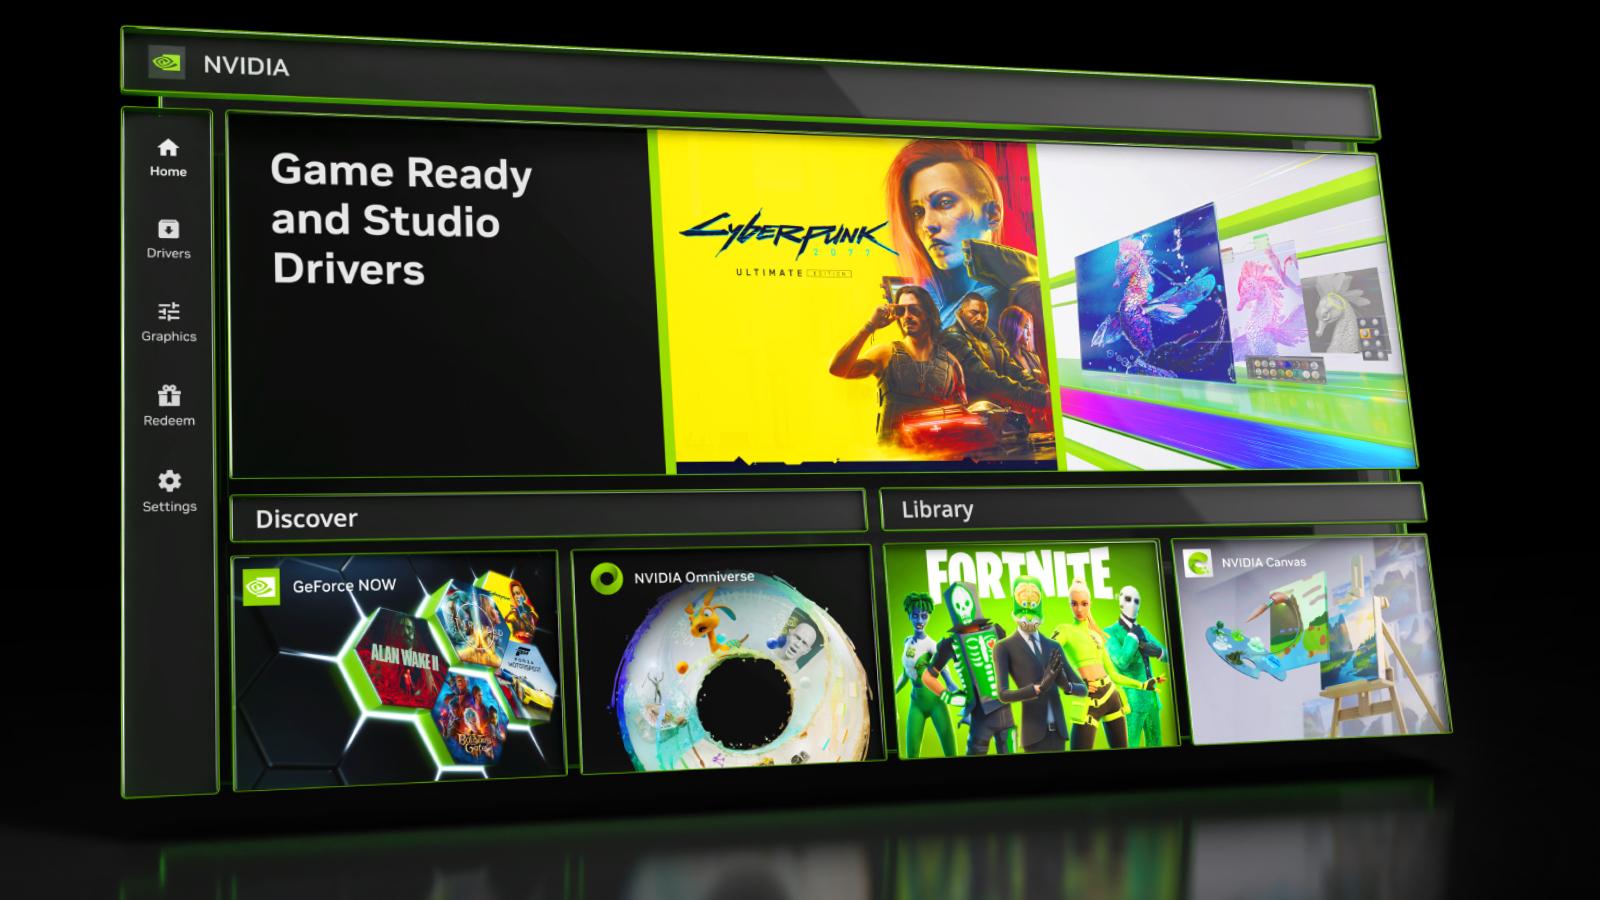 Nvidia App screenshot showing cyberpunk and other titles